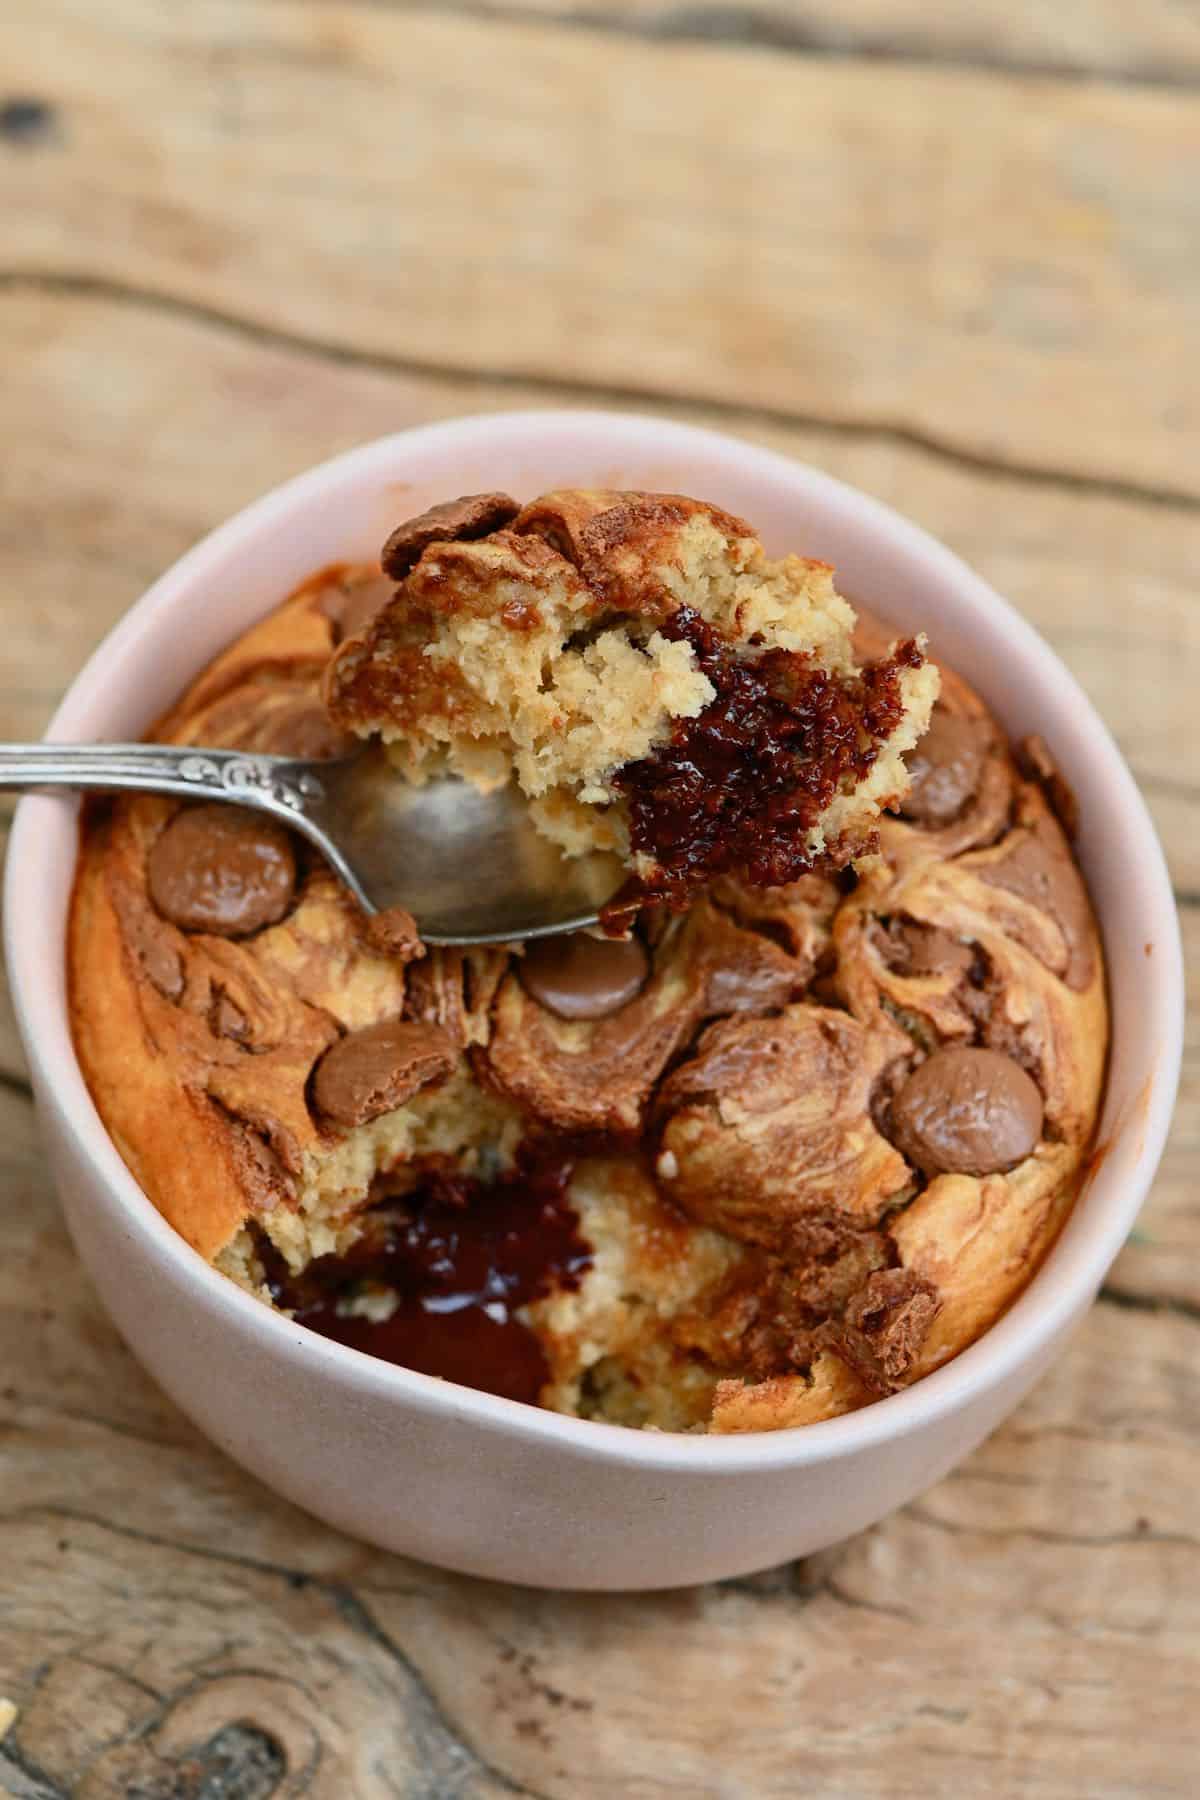 A spoon dipped in peanut butter chocolate baked oats